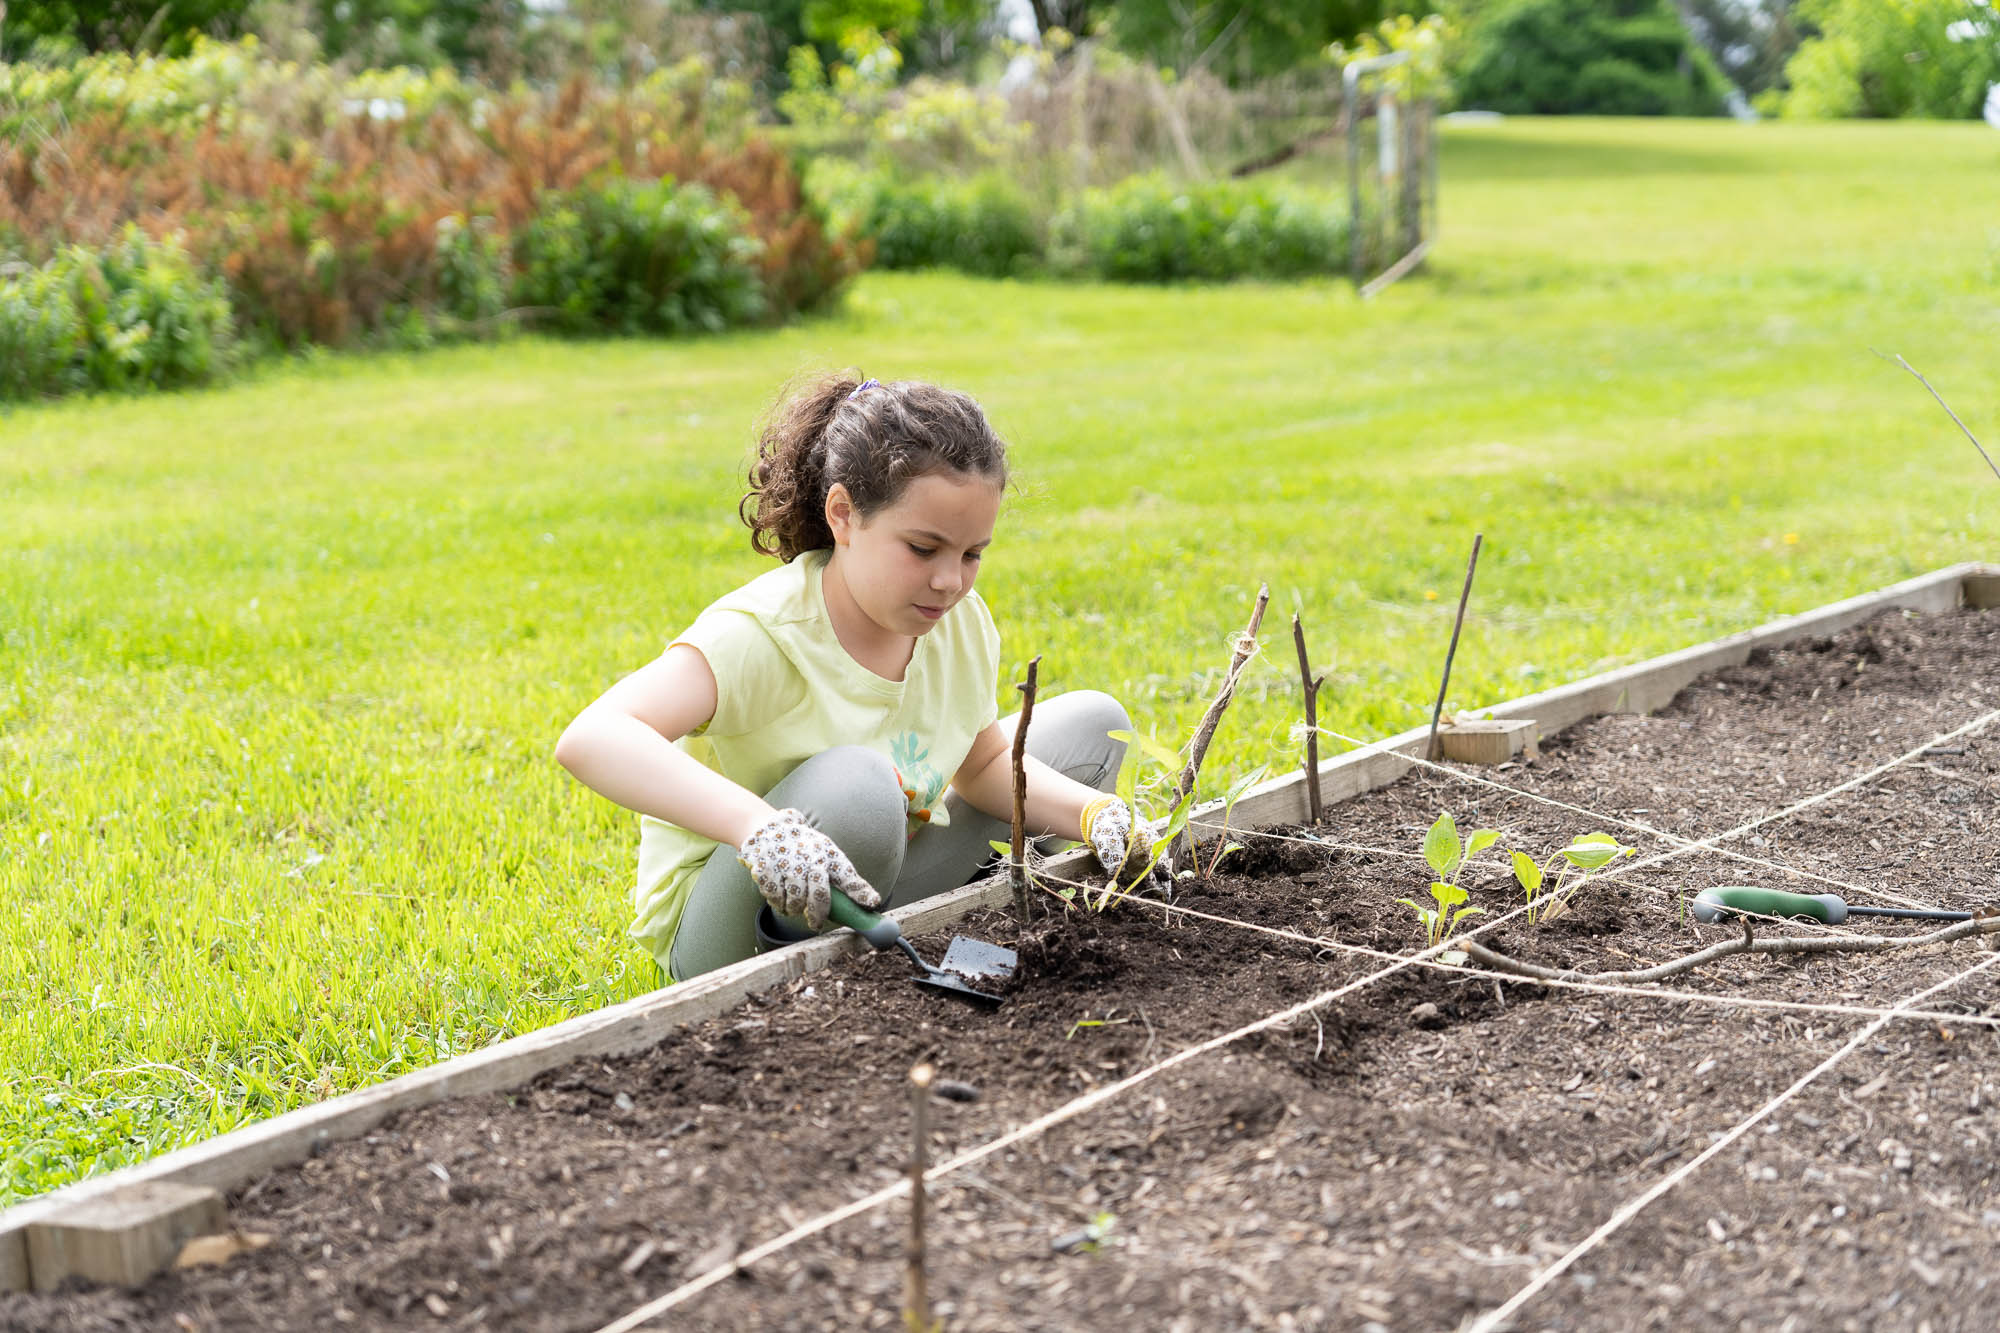 Child planting into raised garden bed, sectioned out with string